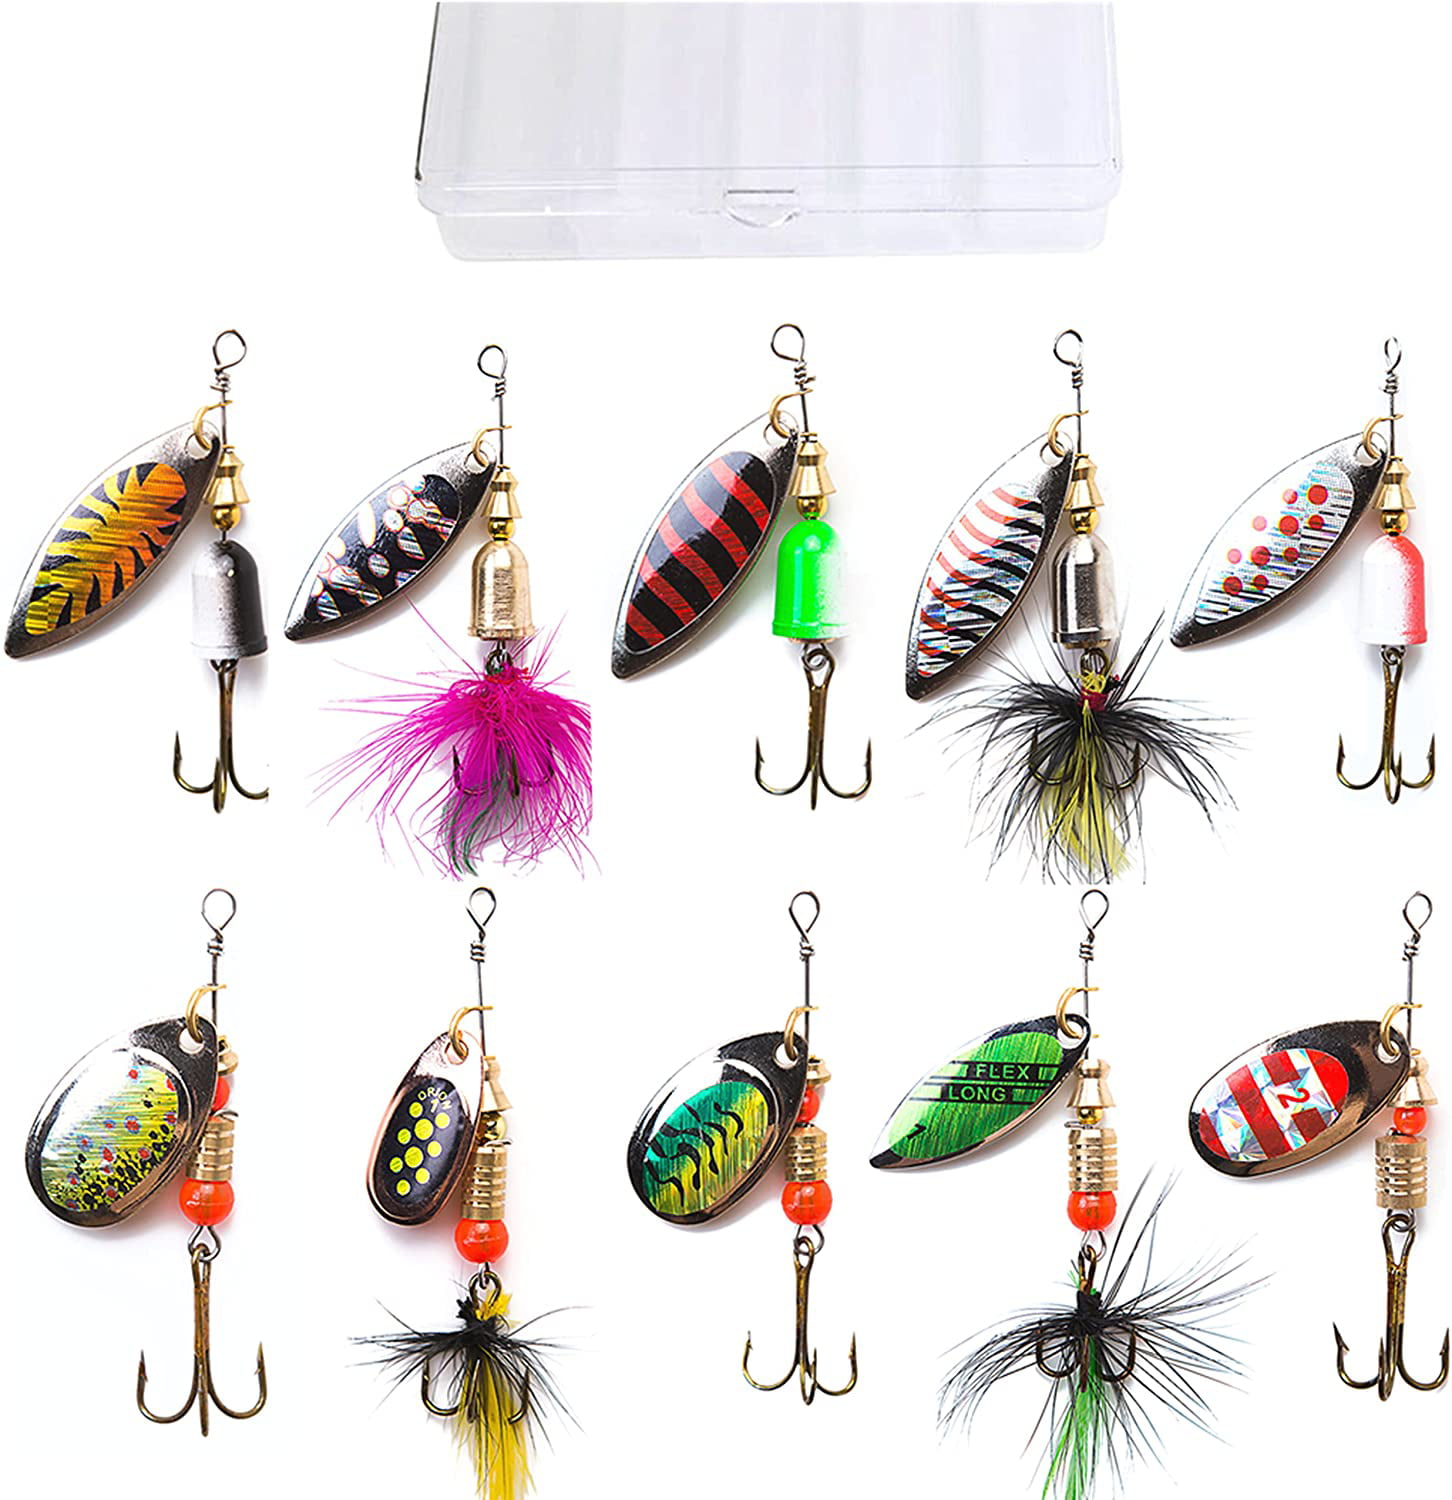 30pcs Fishing Lures Spinner Hard Bait Artificial Bait Tackle Fishing Wobblers Casting Spoon Trout Bass Salmon Pike Walleye Perch 